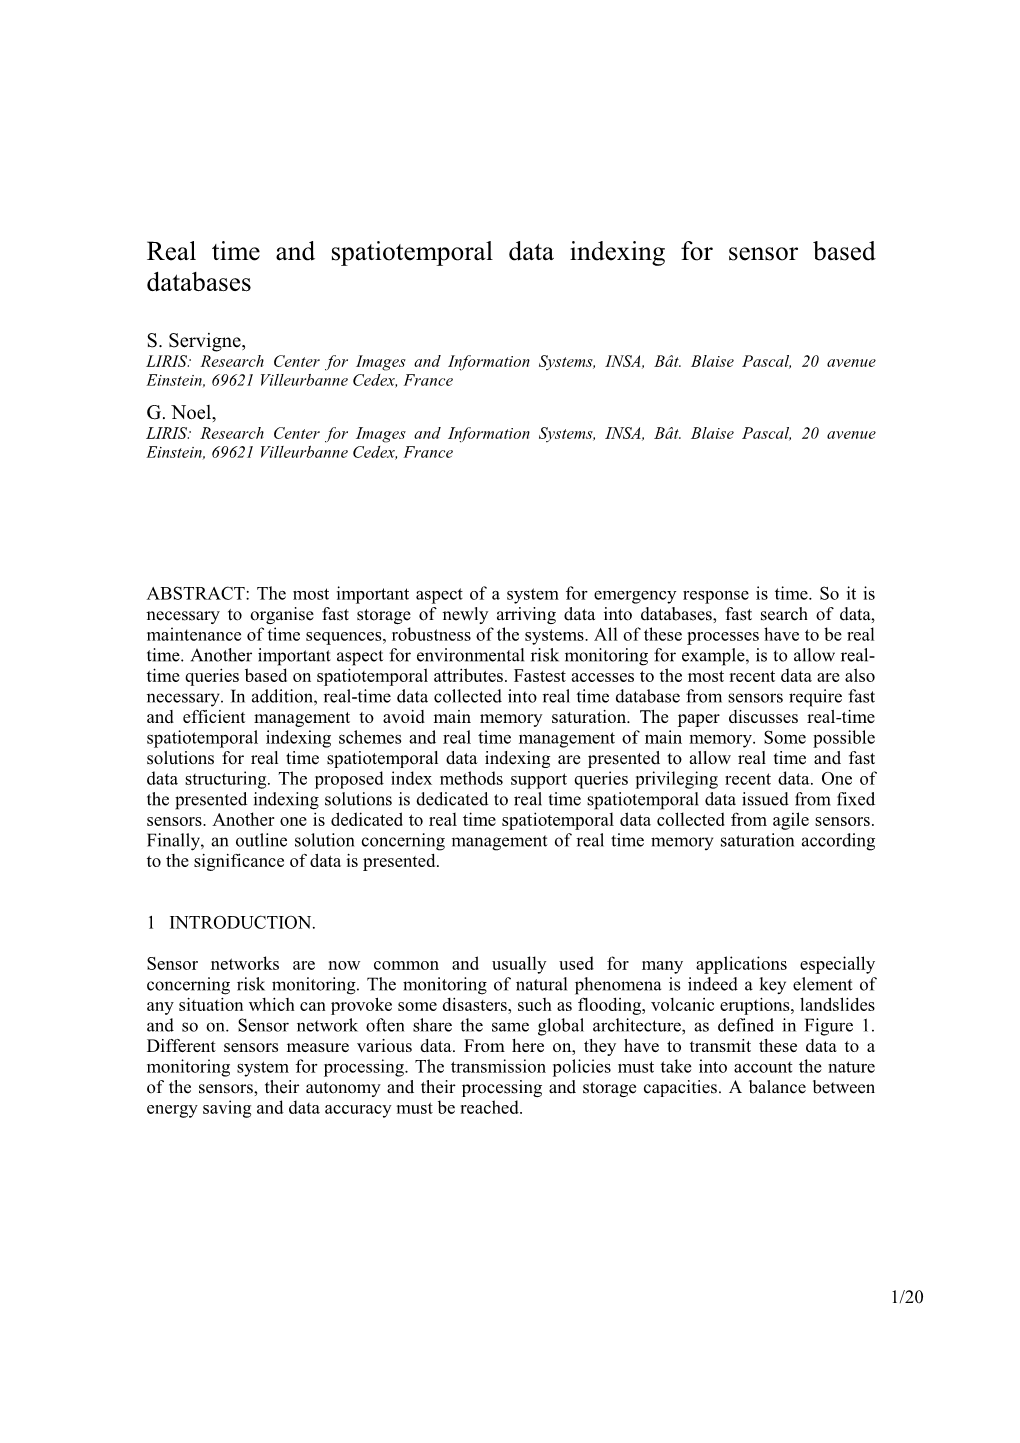 Real Time and Spatiotemporal Data Indexing for Sensor Based Databases